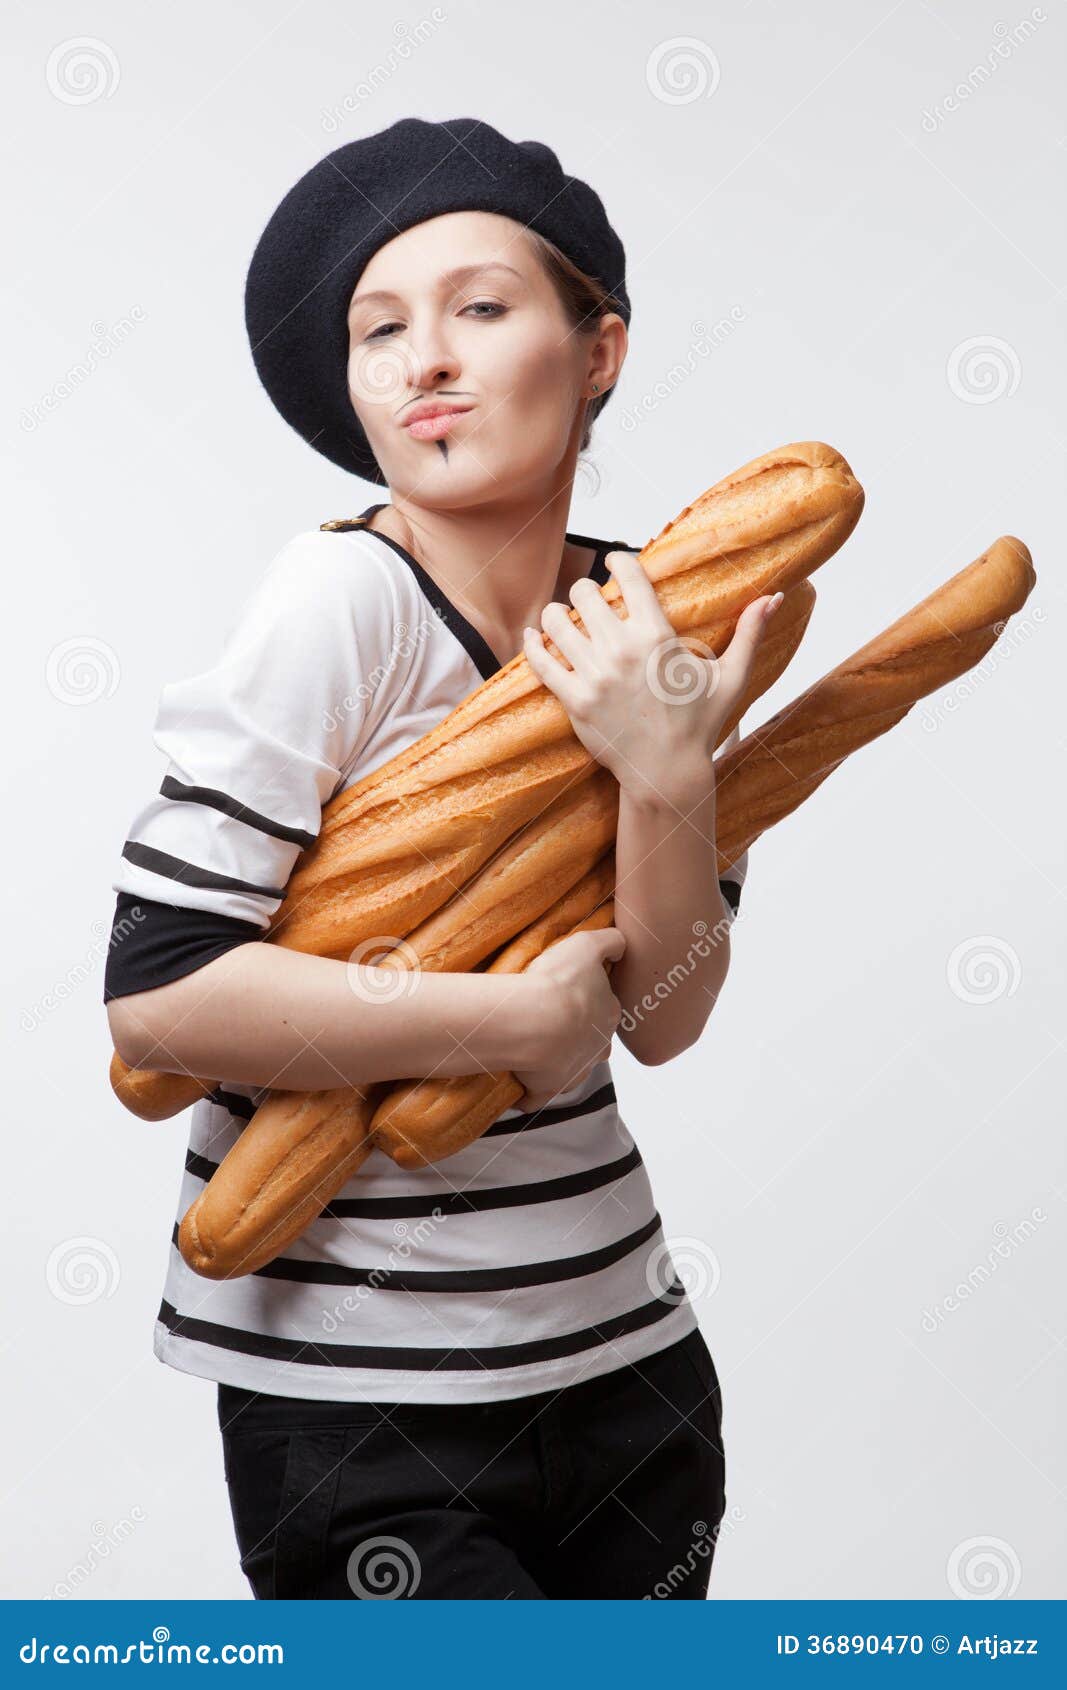 woman-holding-baguettes-isolated-white-background-36890470.jpg